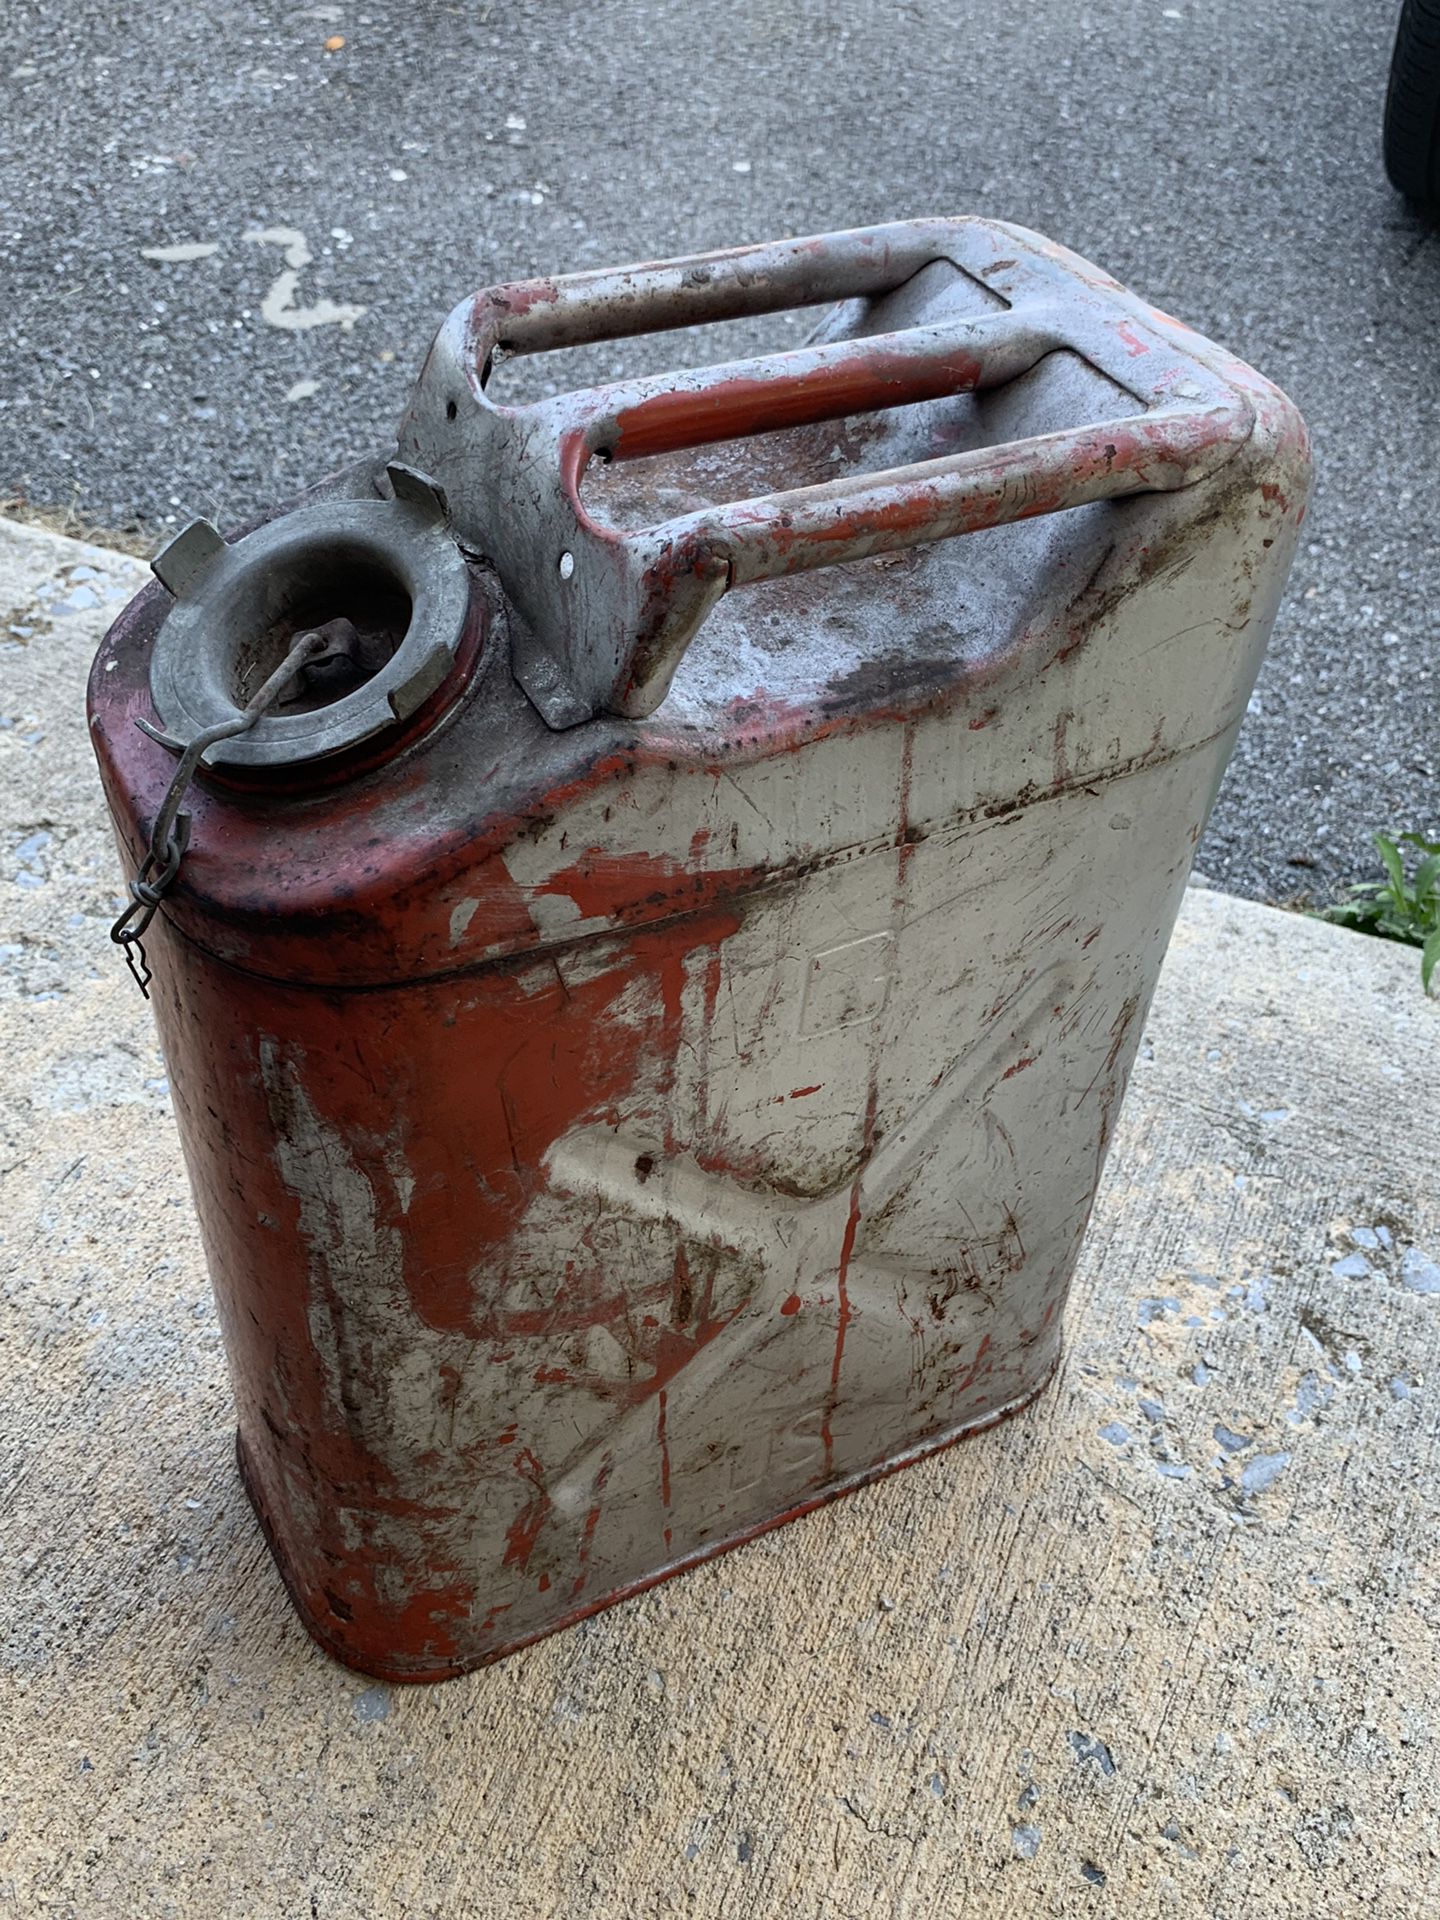 Old metal 5 gallon fuel tank. Does not have spout.